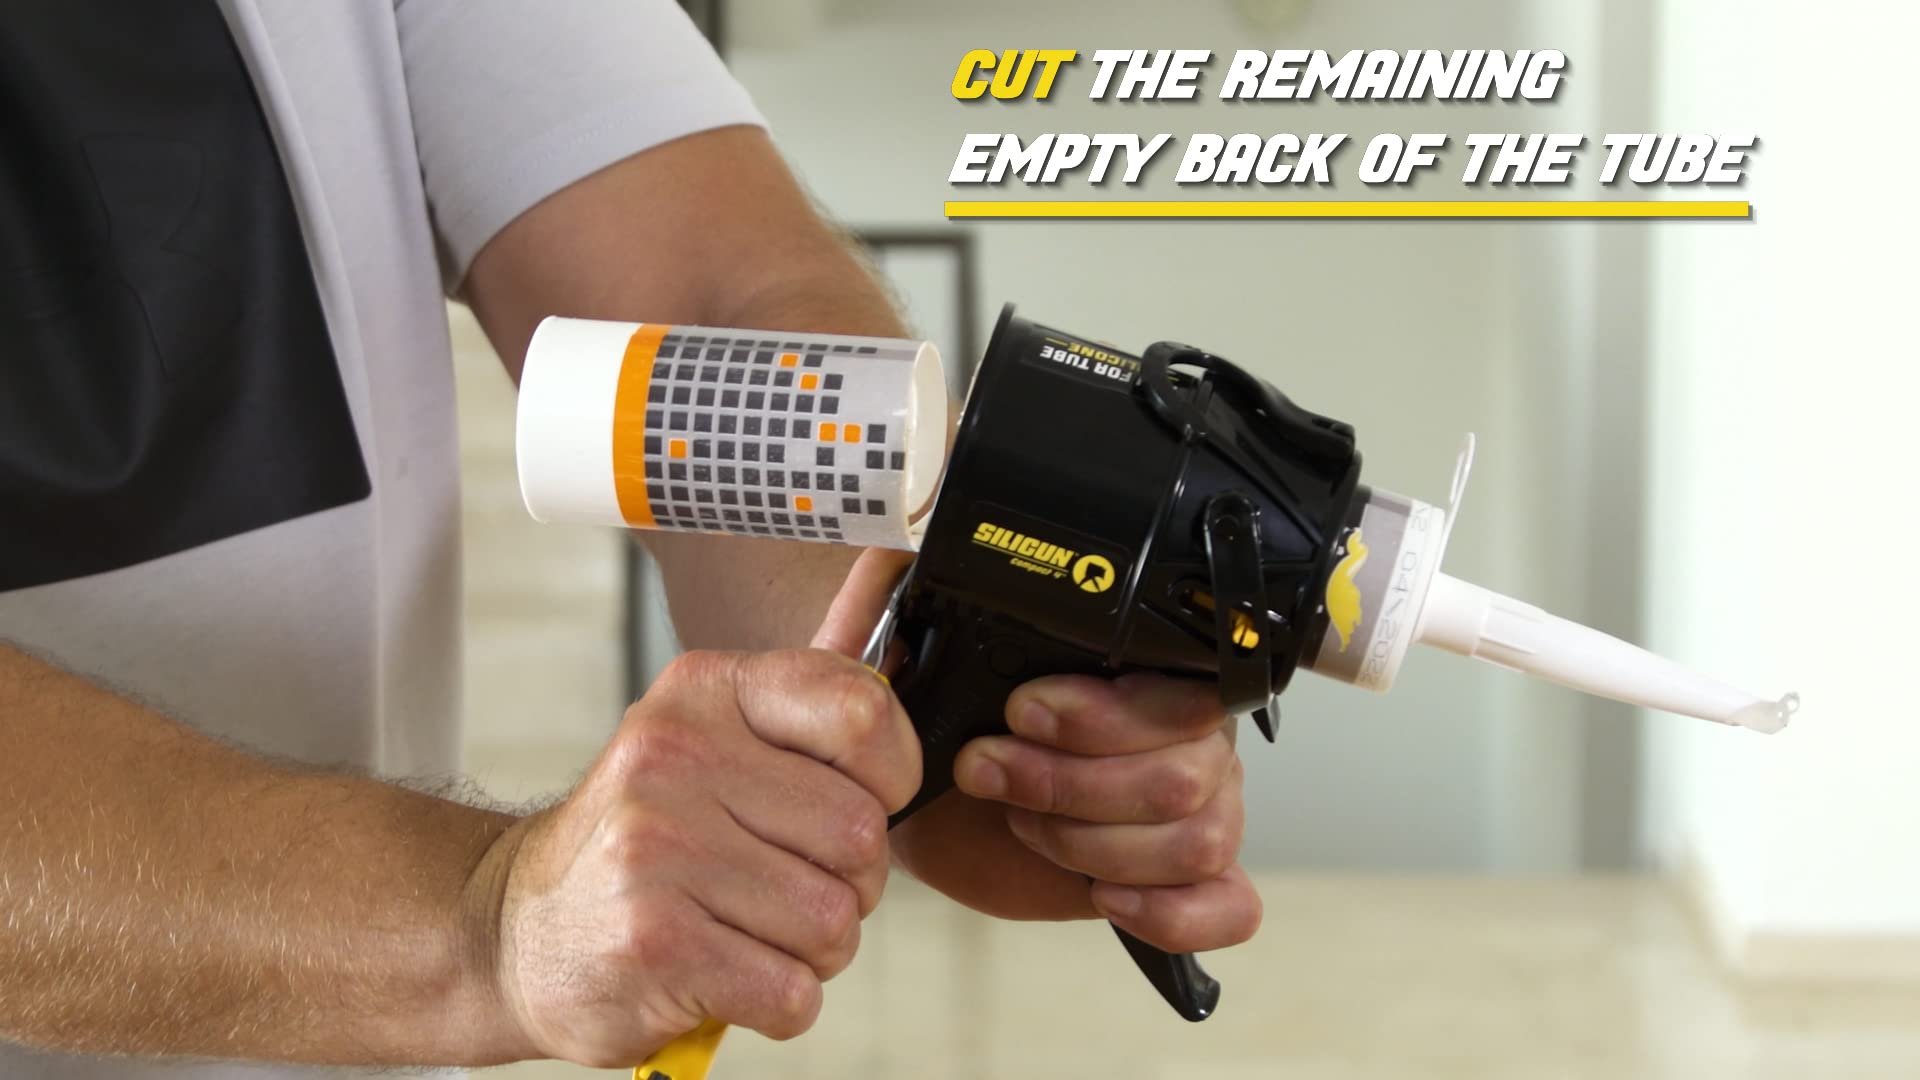 SILIGUN Caulking Gun - Anti Drip Extreme-Duty Caulking Gun - Patented New and Innovative Design - Lightweight ABS Frame - for the Smallest to the Largest Jobs (1)